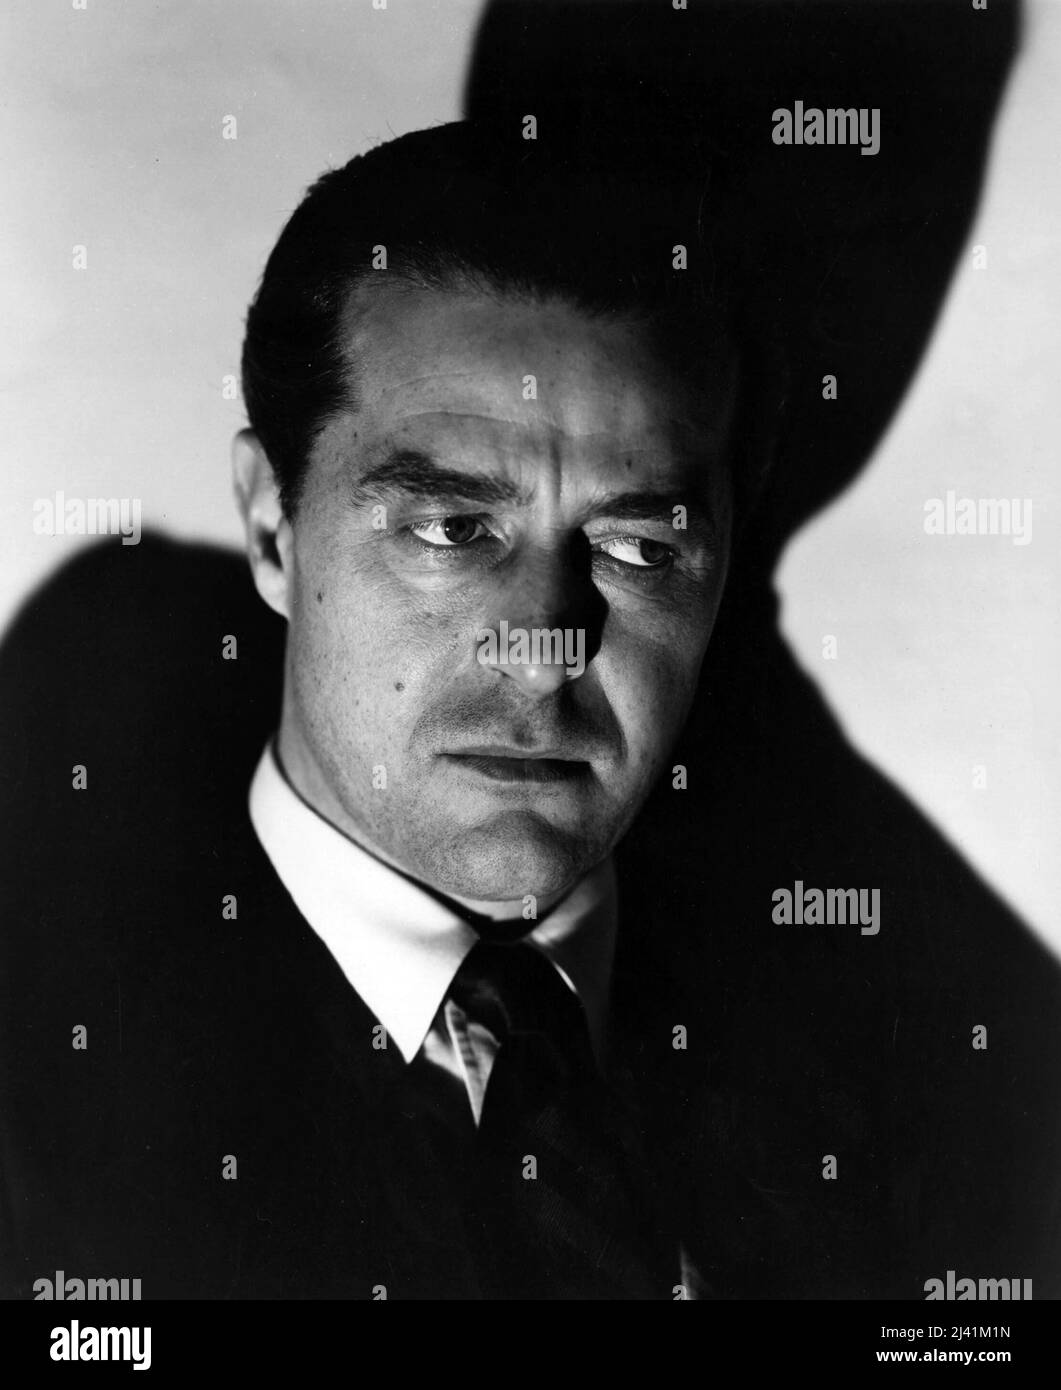 RAY MILLAND in THE LOST WEEKEND (1945), directed by BILLY WILDER ...